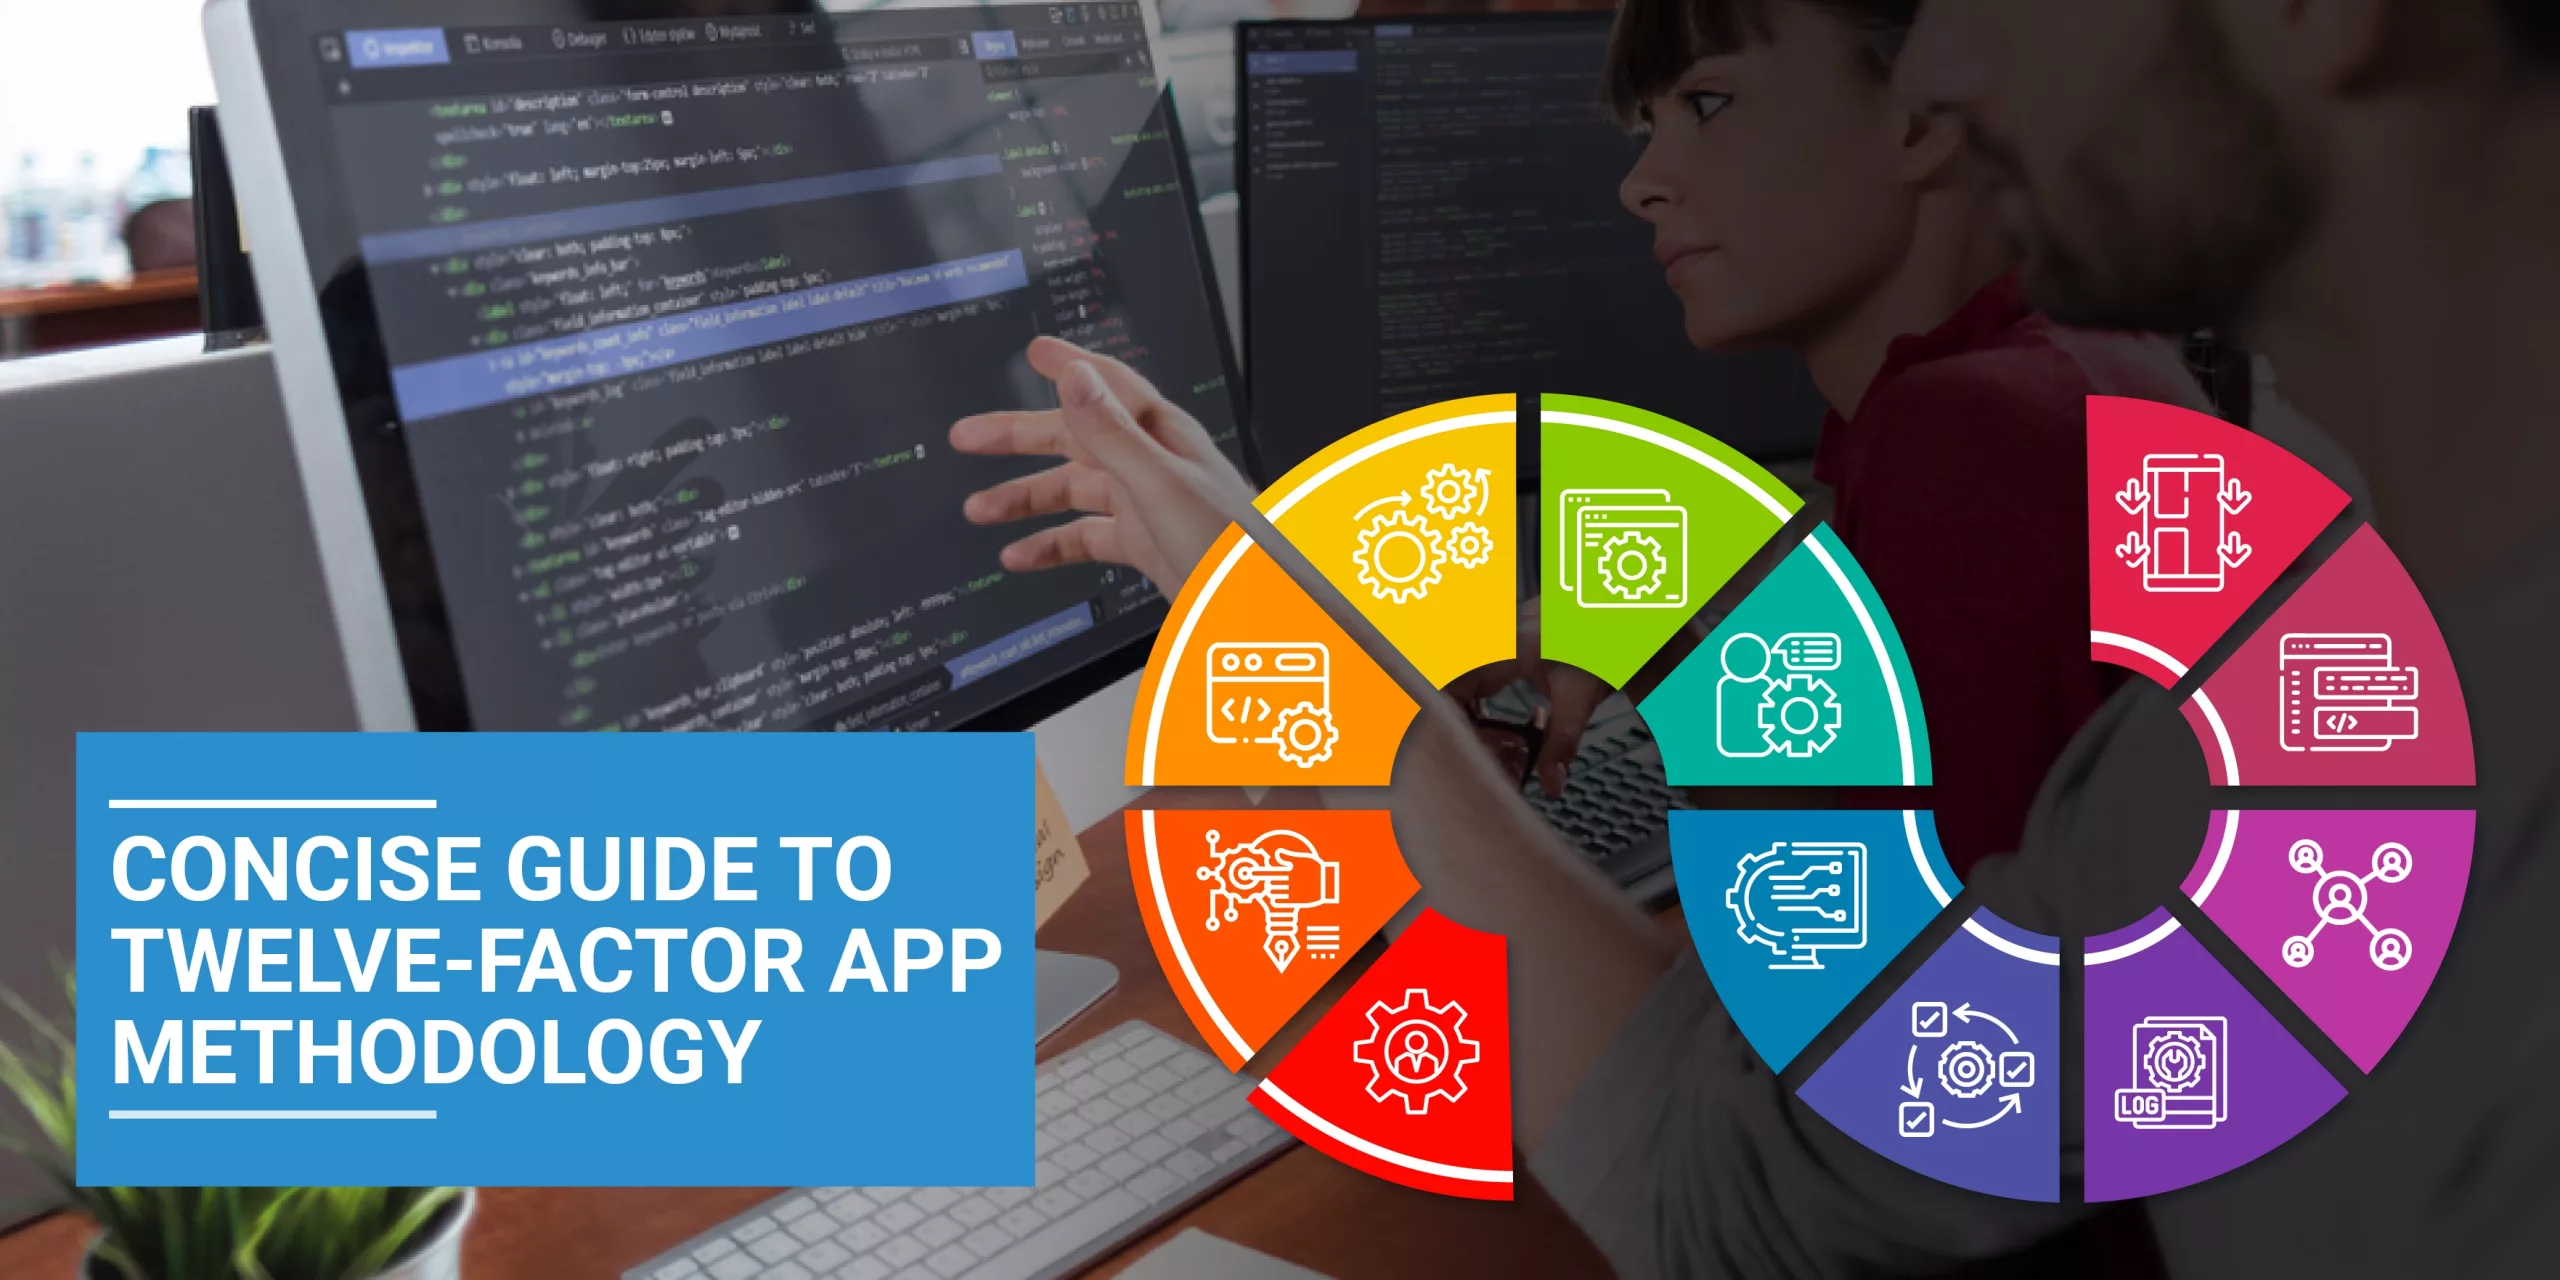 Concise Guide to Twelve-Factor App Methodology